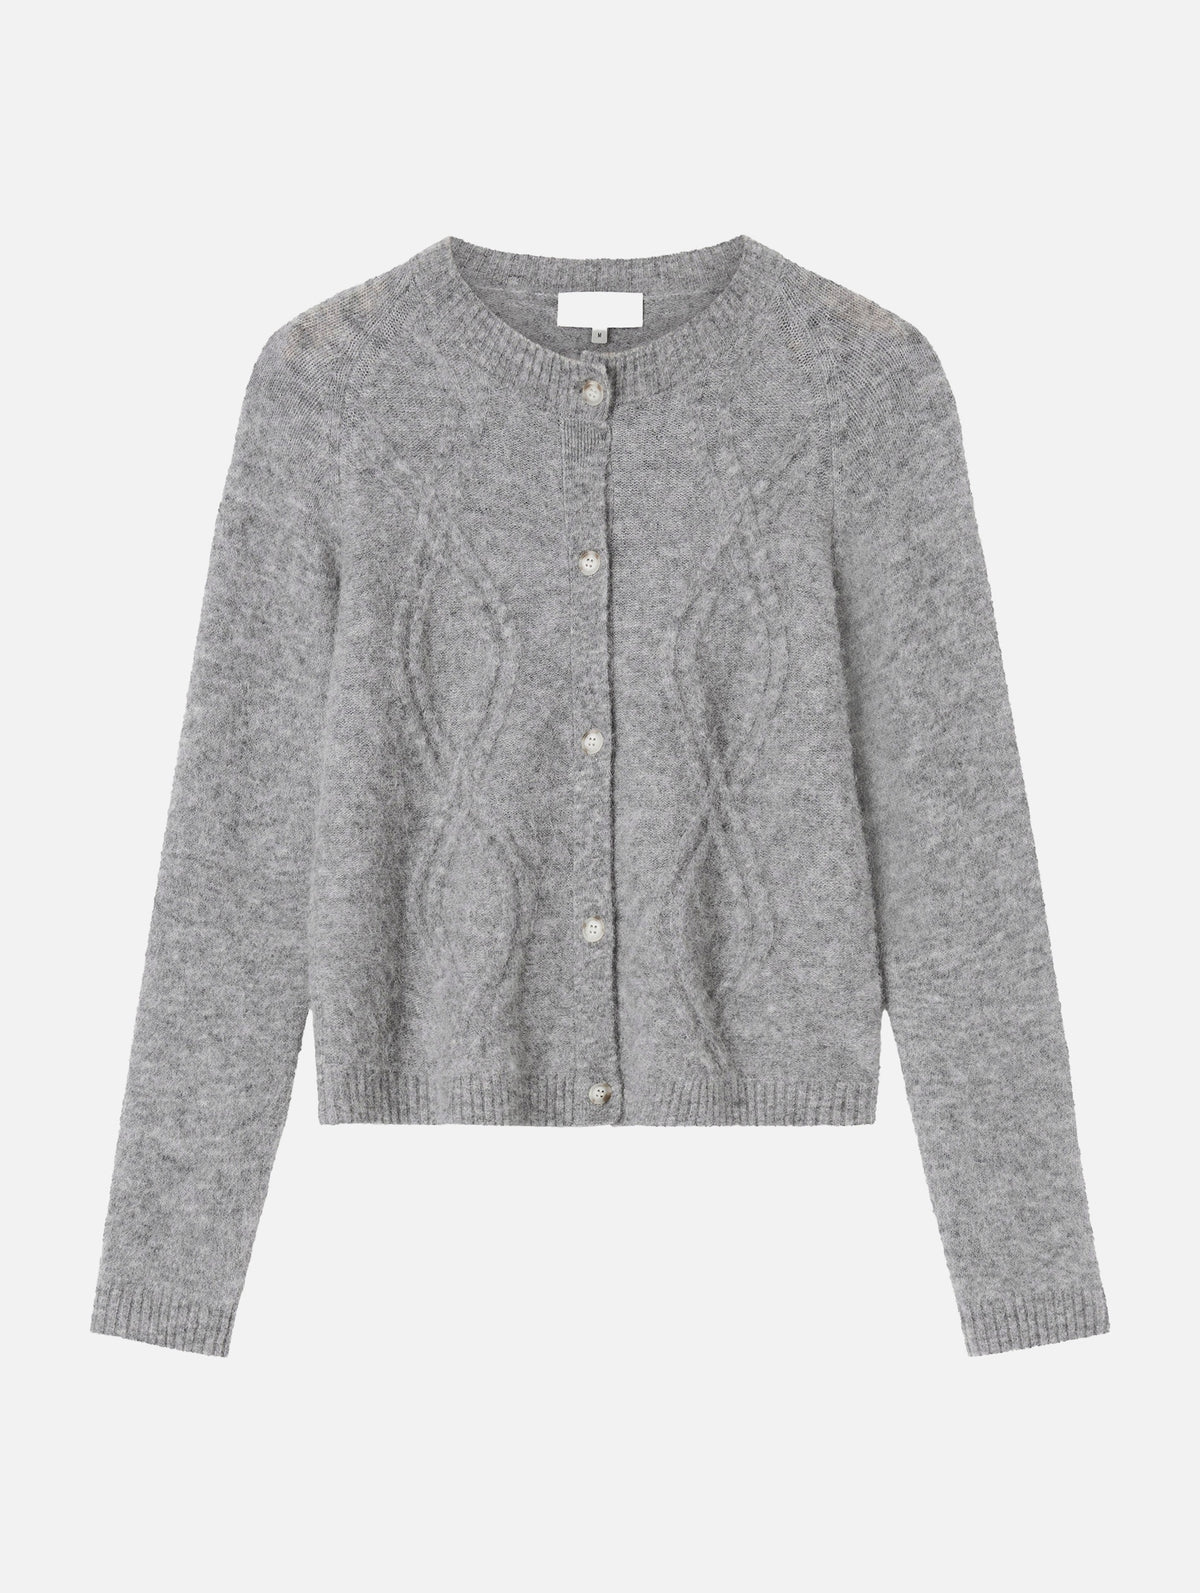 Sawyer Cable Knit Cardigan in Grey